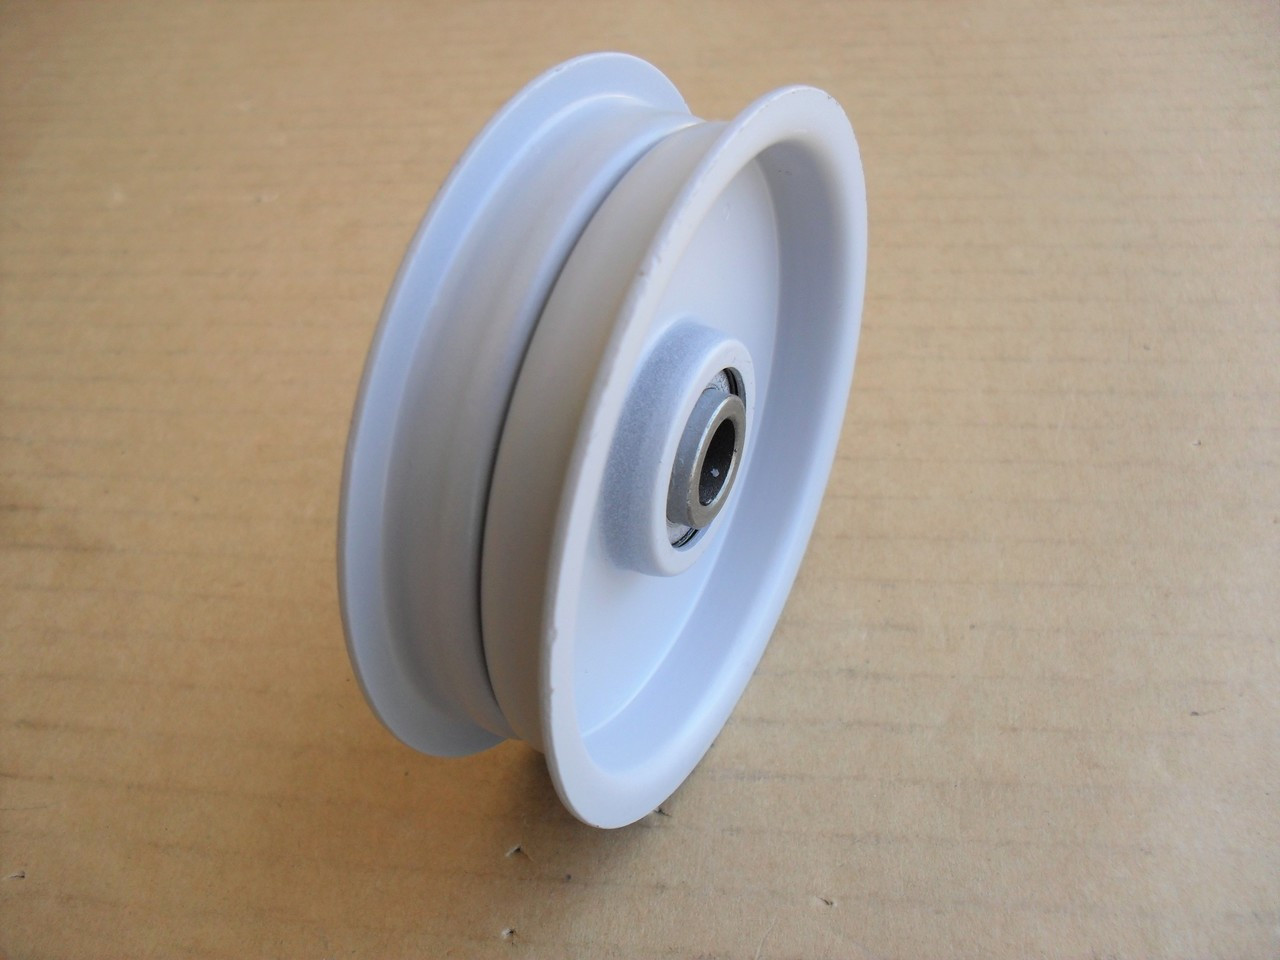 Idler Pulley for Lawn Boy 706364 Lawnboy, Made In USA Height: 7/8" ID: 3/8" OD: 3-1/8"